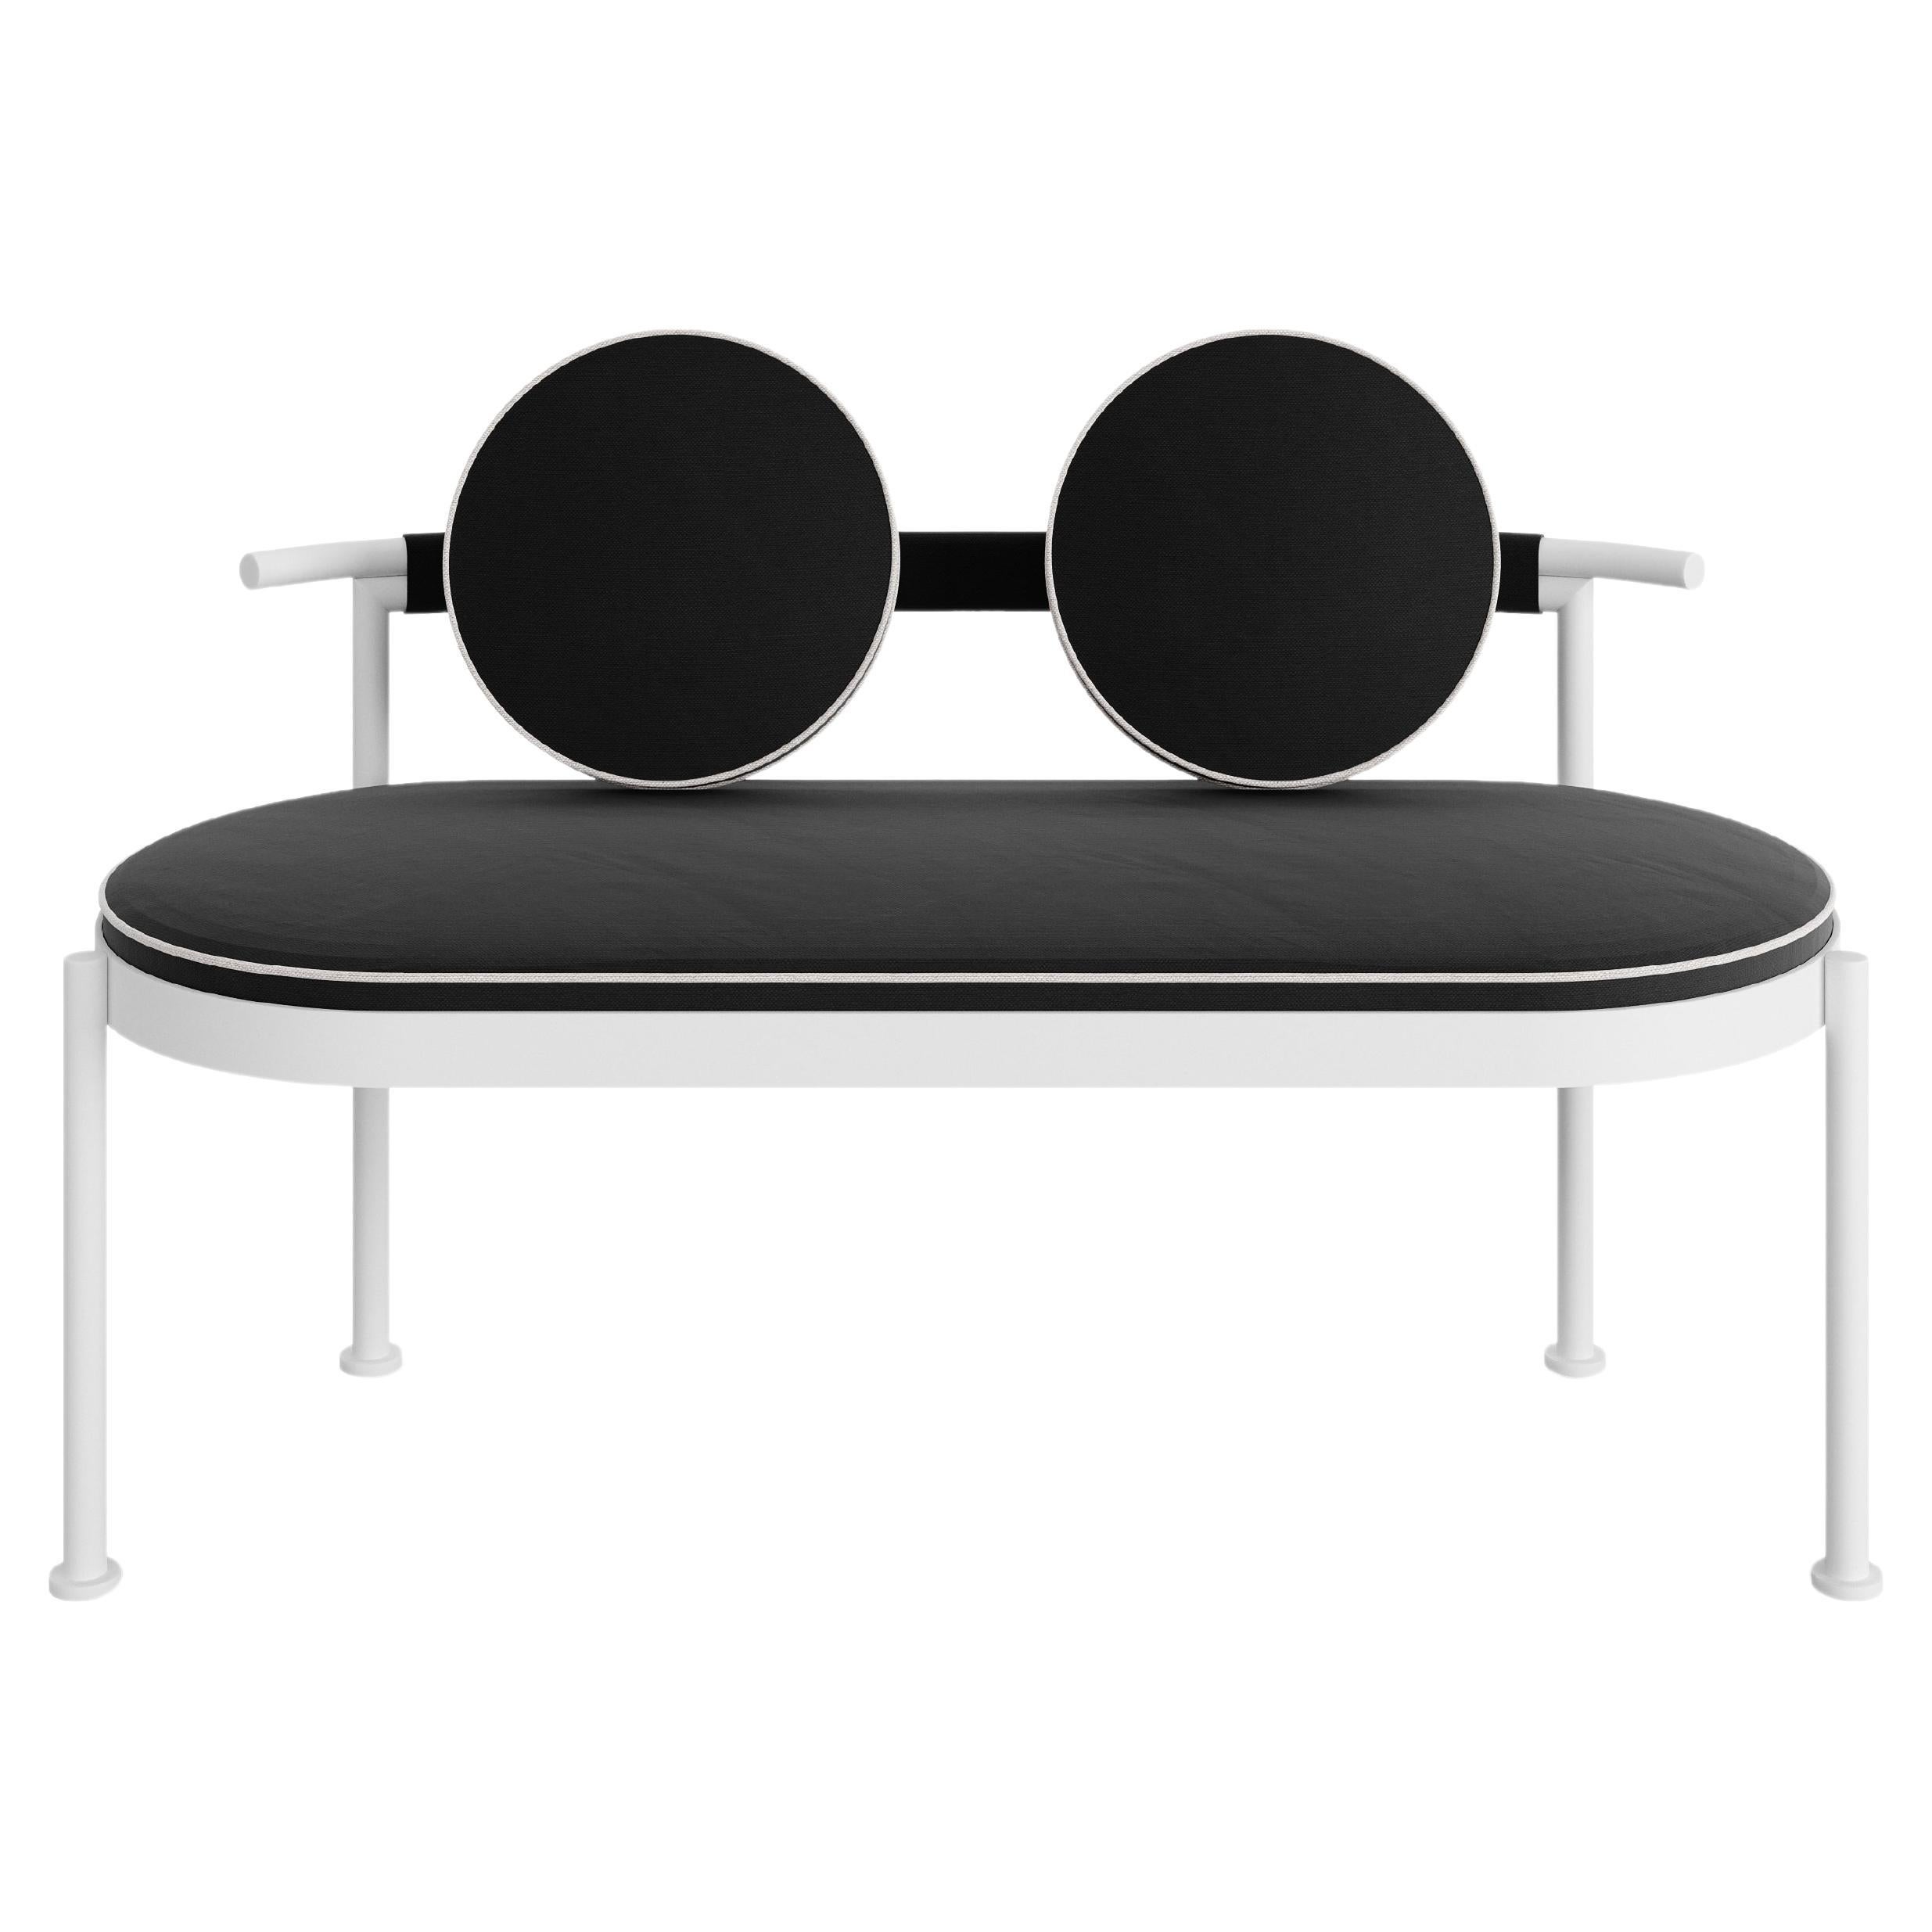 Bench with Back in Black Stainless Steel and Black Water-Resistant Fabric For Sale